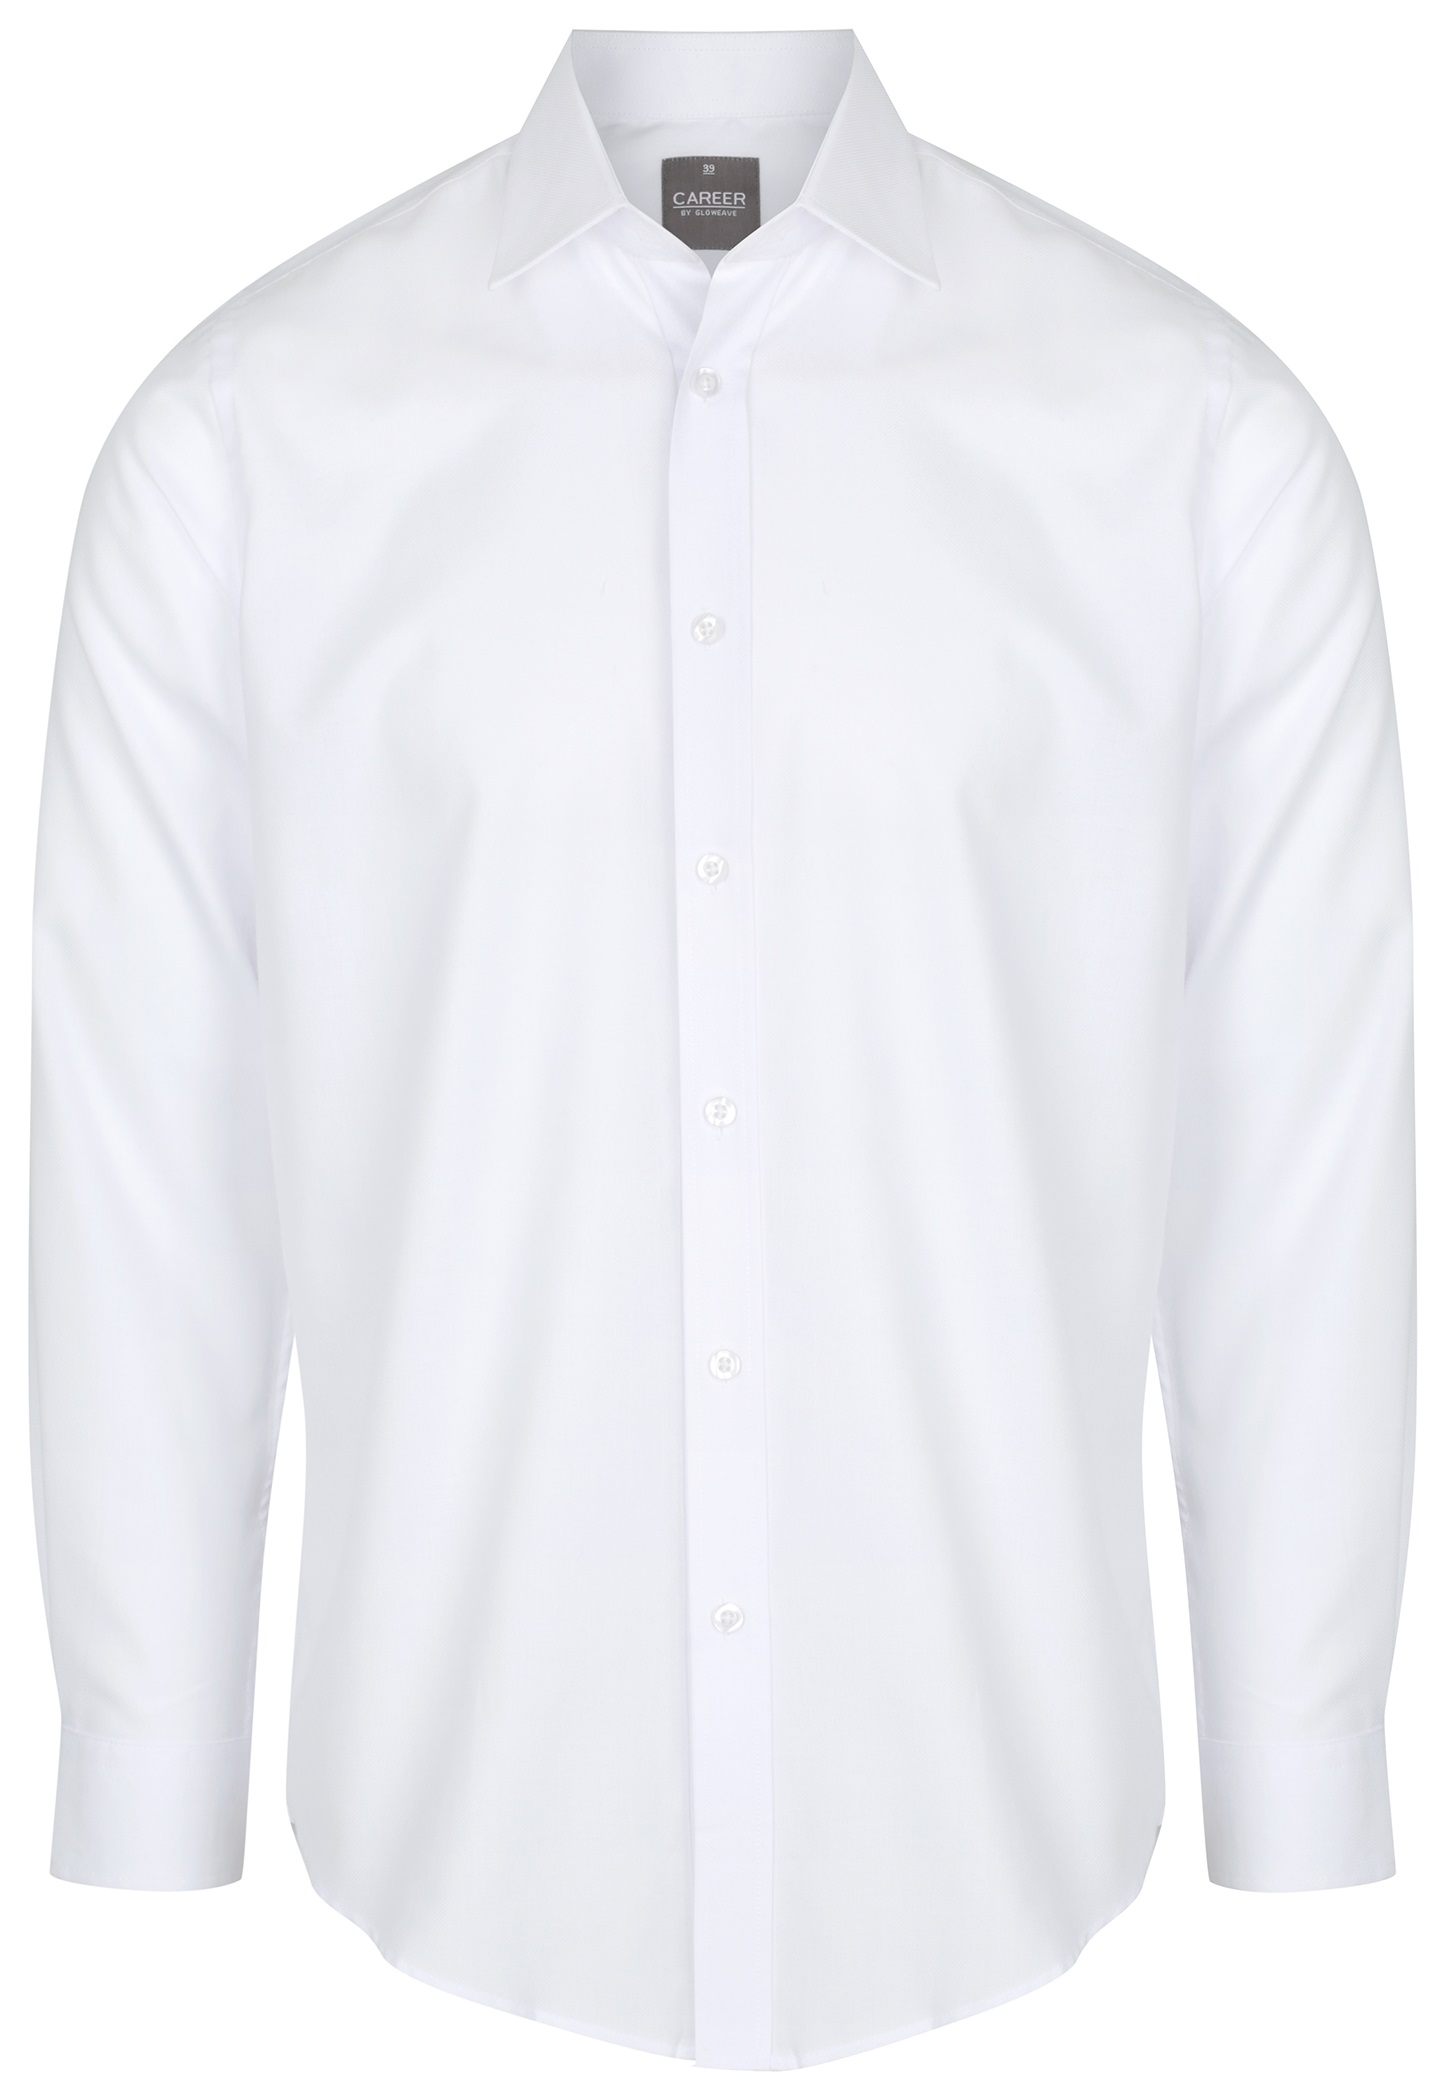 Ultimate white shirt for men | Big Mens Size shirts at BSP